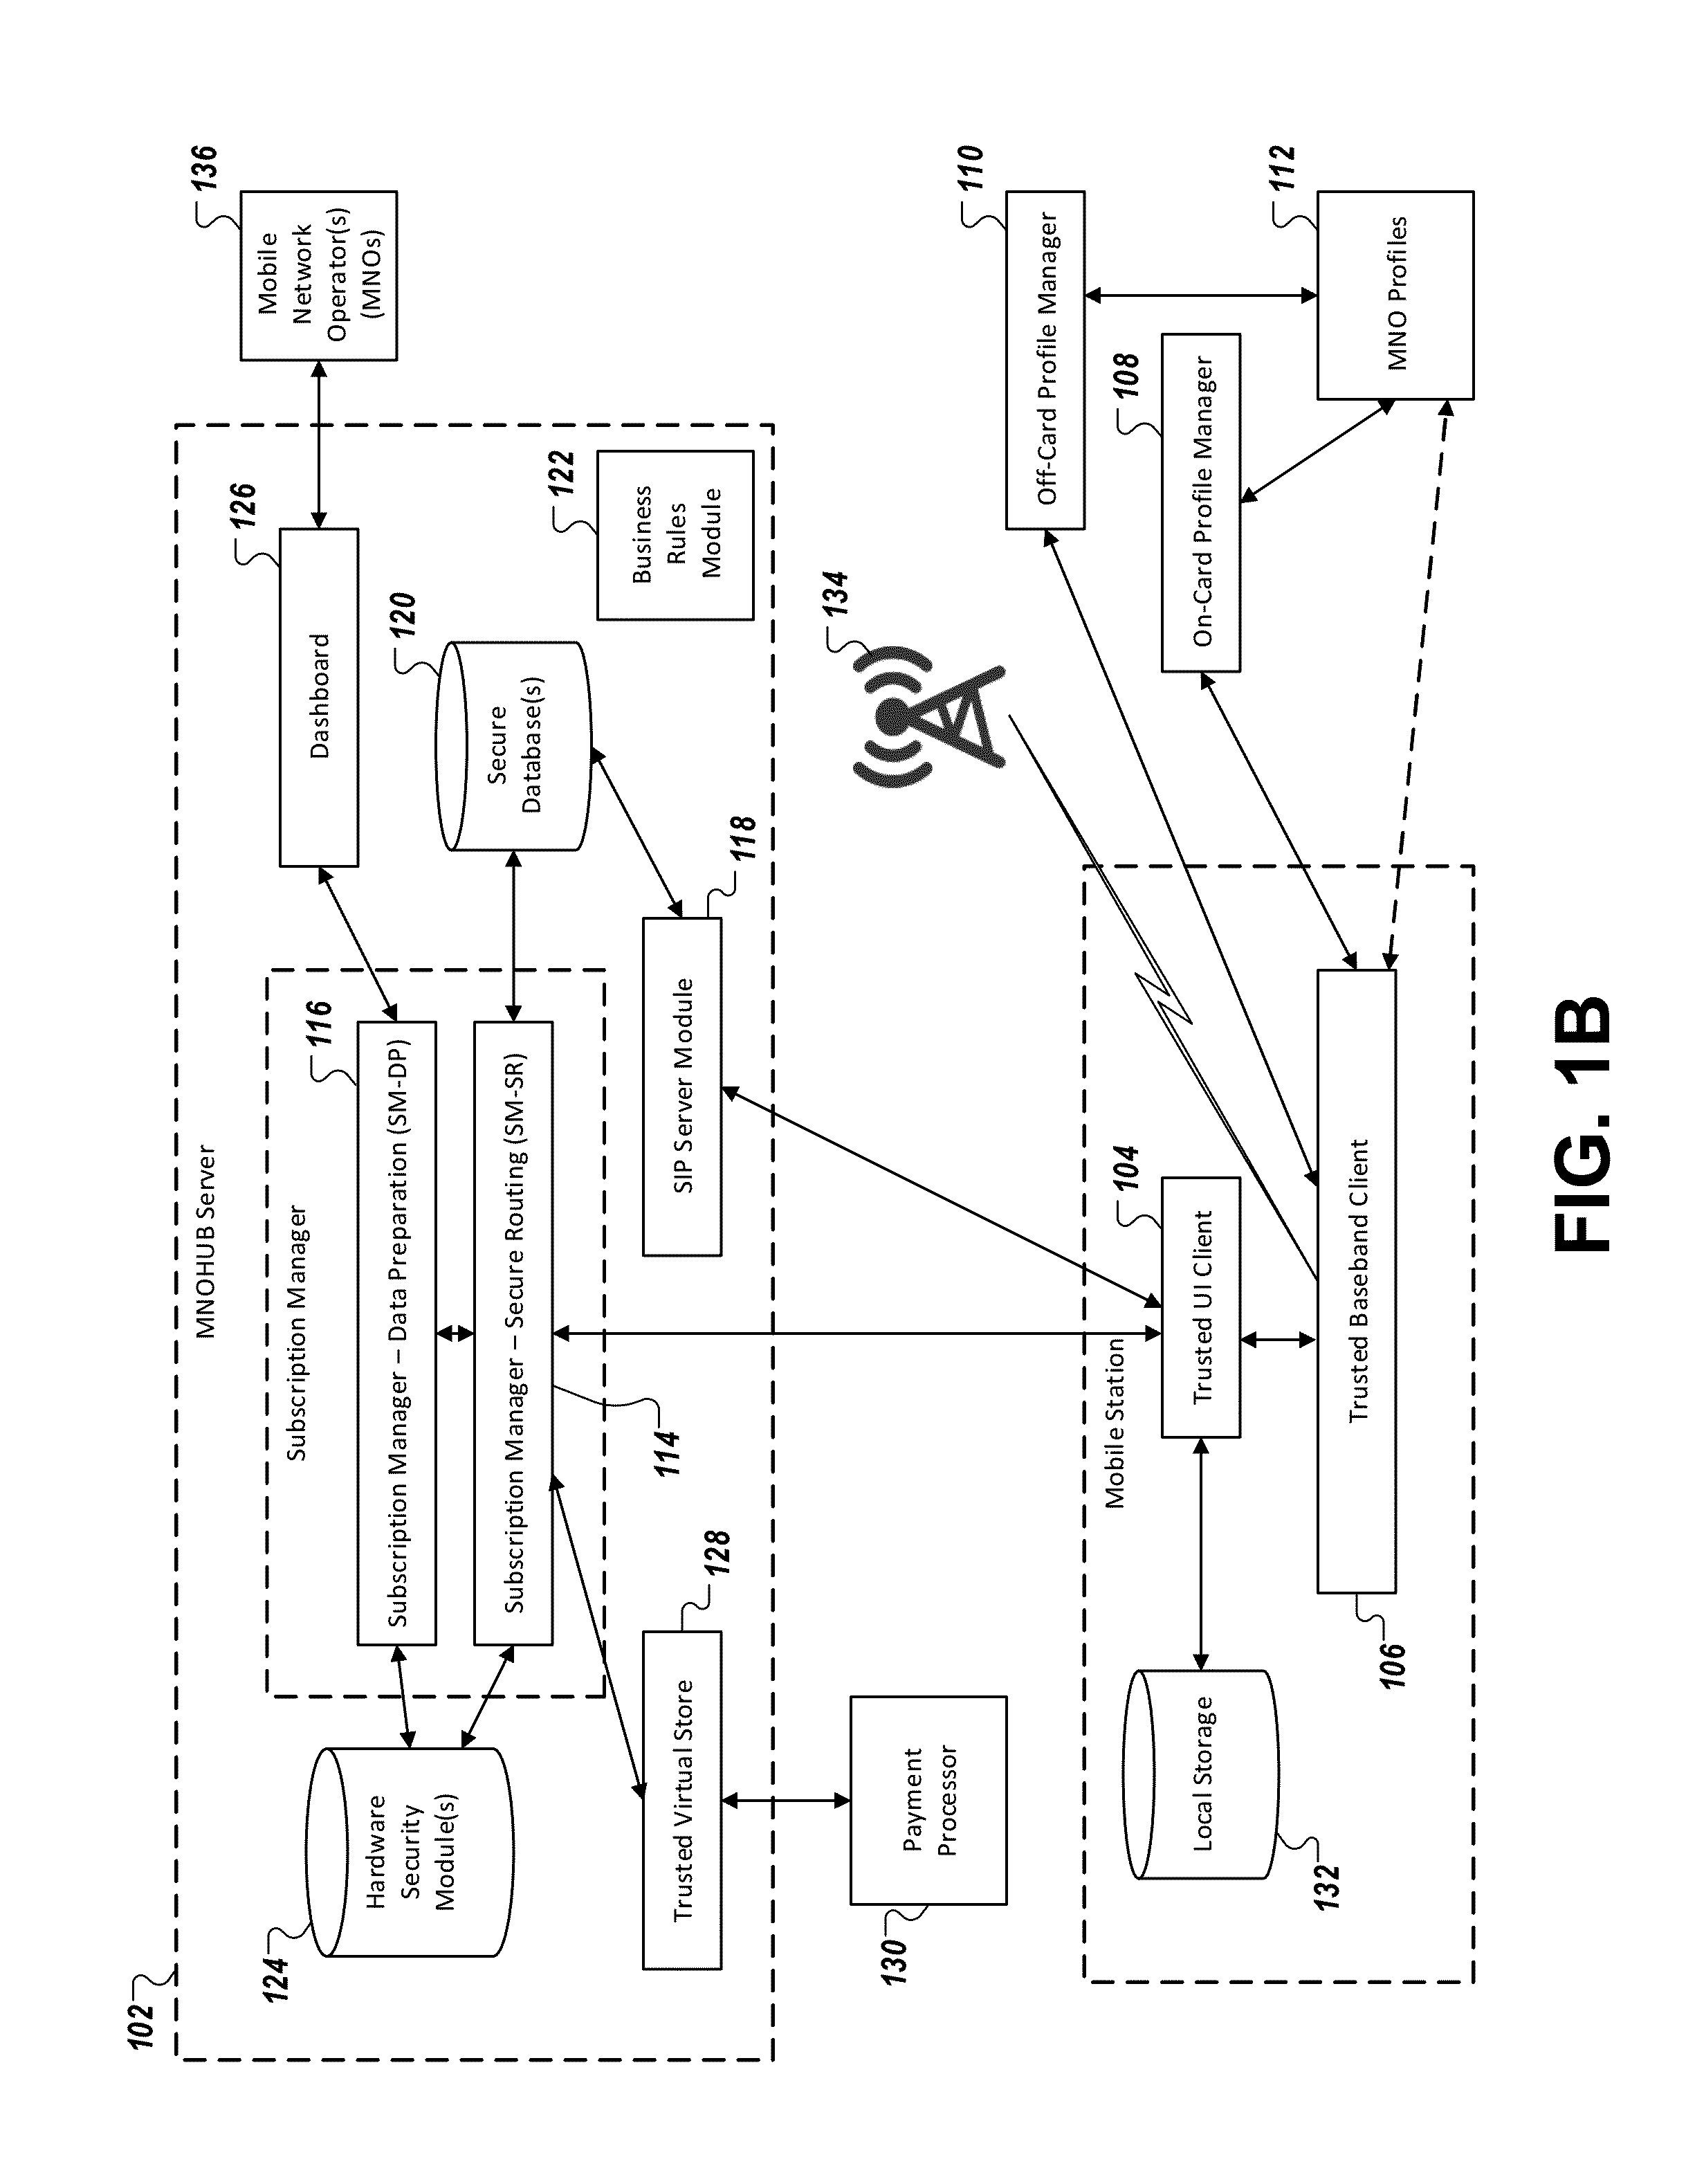 Apparatuses, methods and systems for interfacing with a trusted subscription management platform